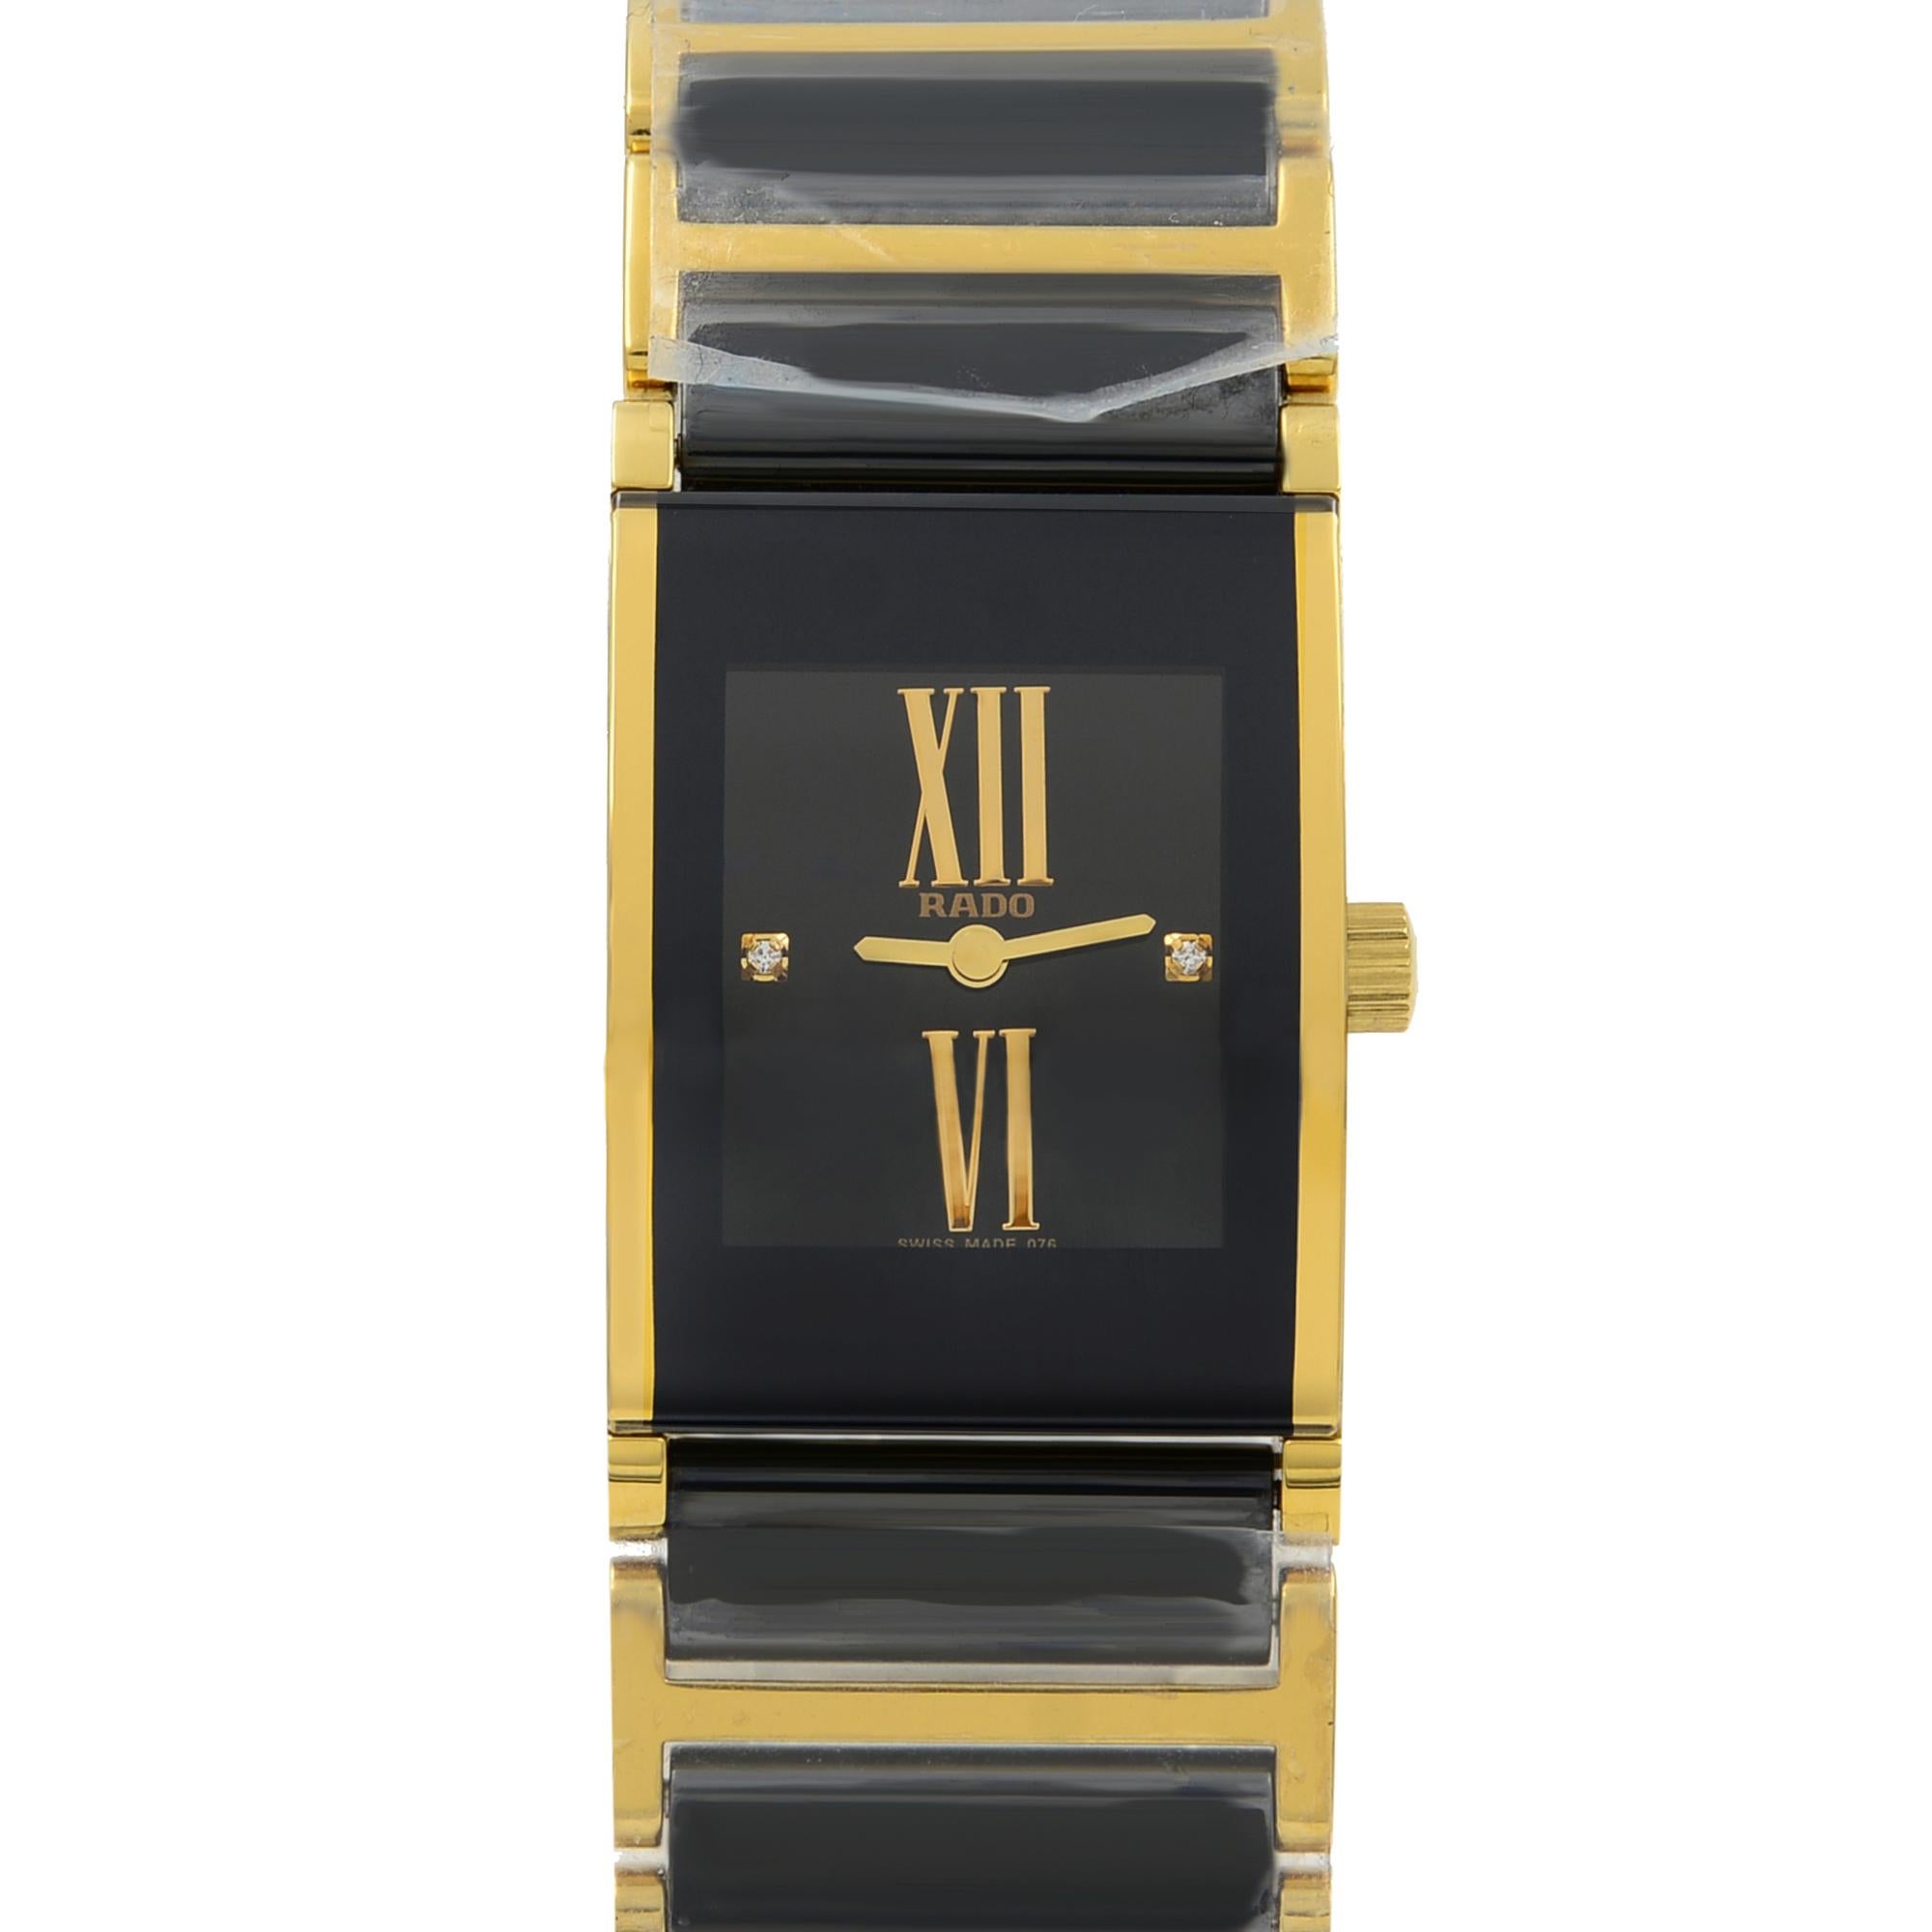 Unworn Rado Integral Jubile Black Dial Steel Ceramic Ladies Quartz Watch R20789762. This Beautiful Ladies Timepiece Is Powered by a Quartz (Battery) Movement and Features: Gold-Tone and Black Ceramic Case and Bracelet. Fixed Bezel, Black Dial with